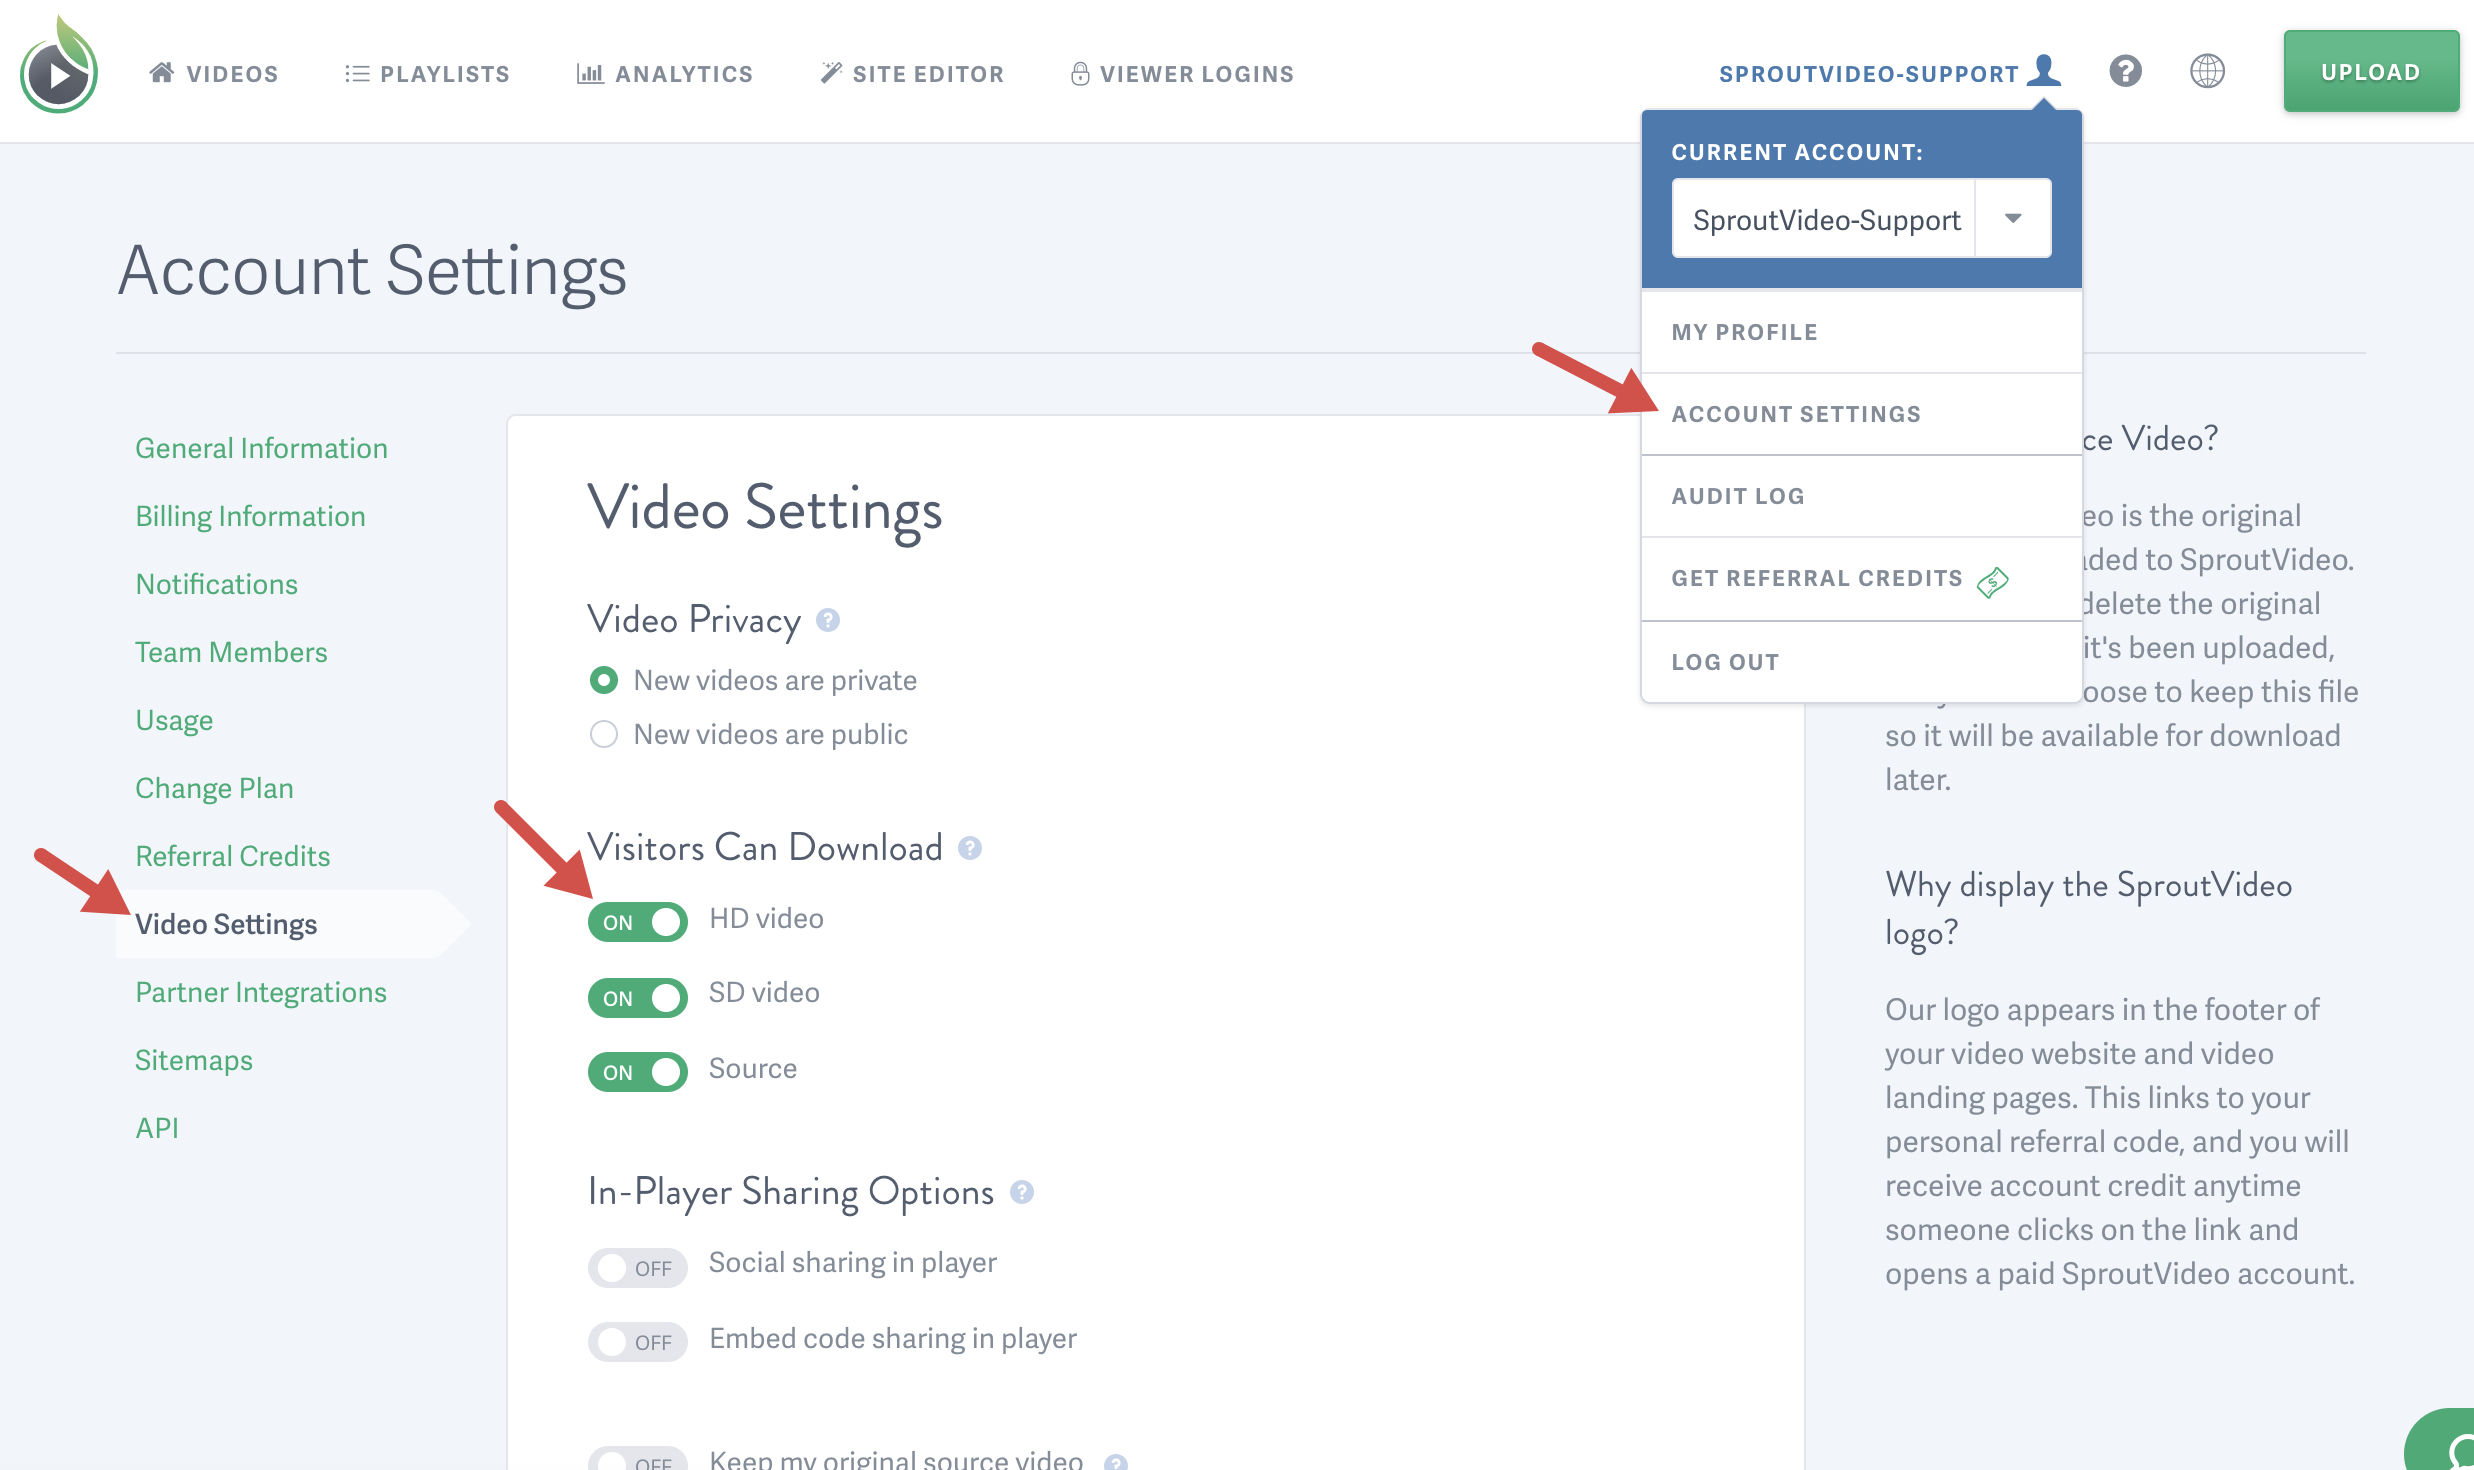 Visitor Download Settings for videos hosted on SproutVideo